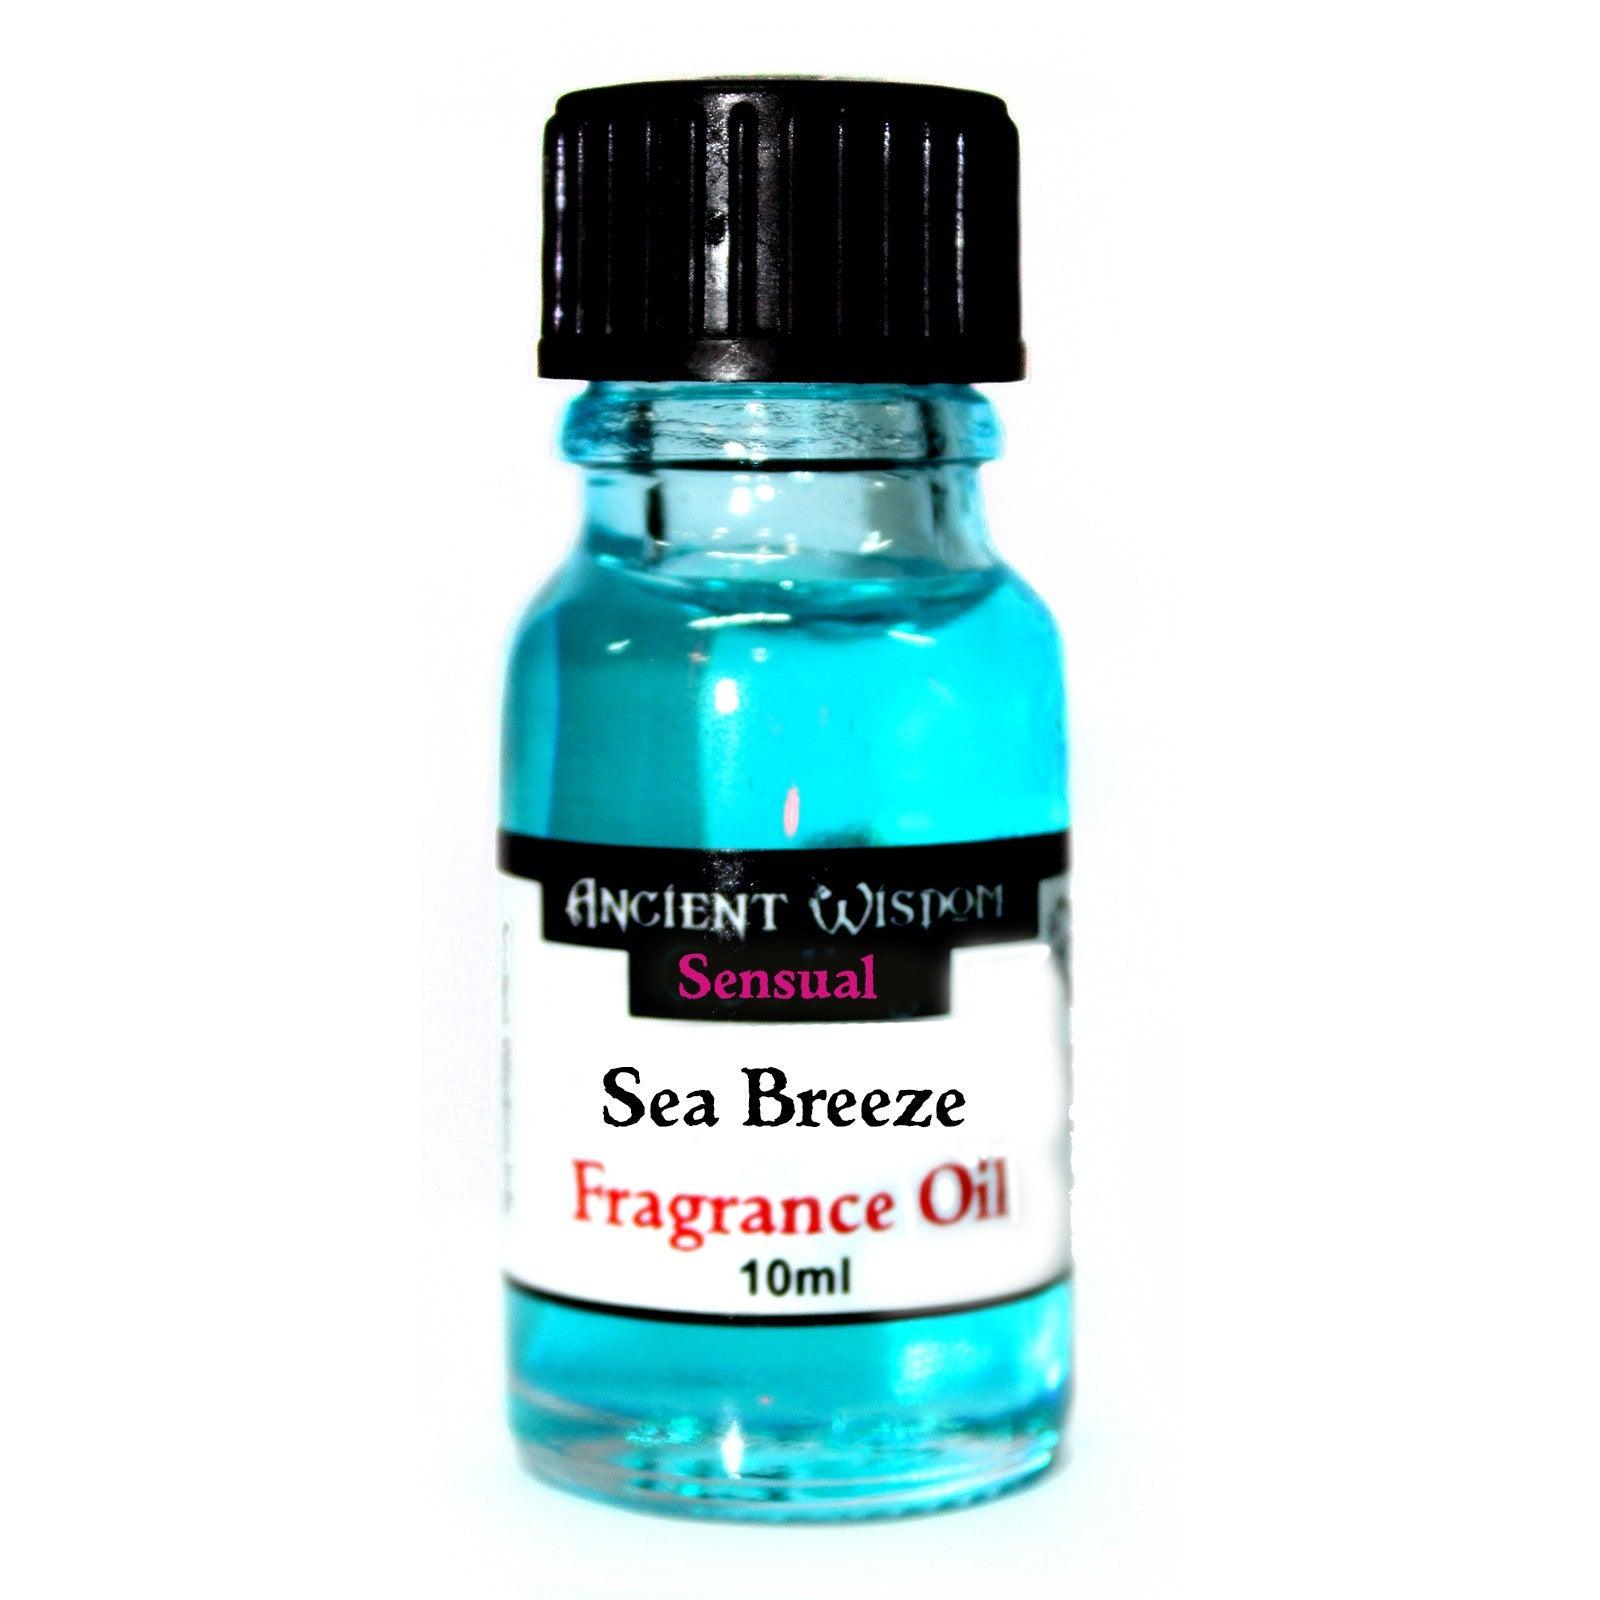 10ml Sea Breeze Fragrance Oil - Charming Spaces